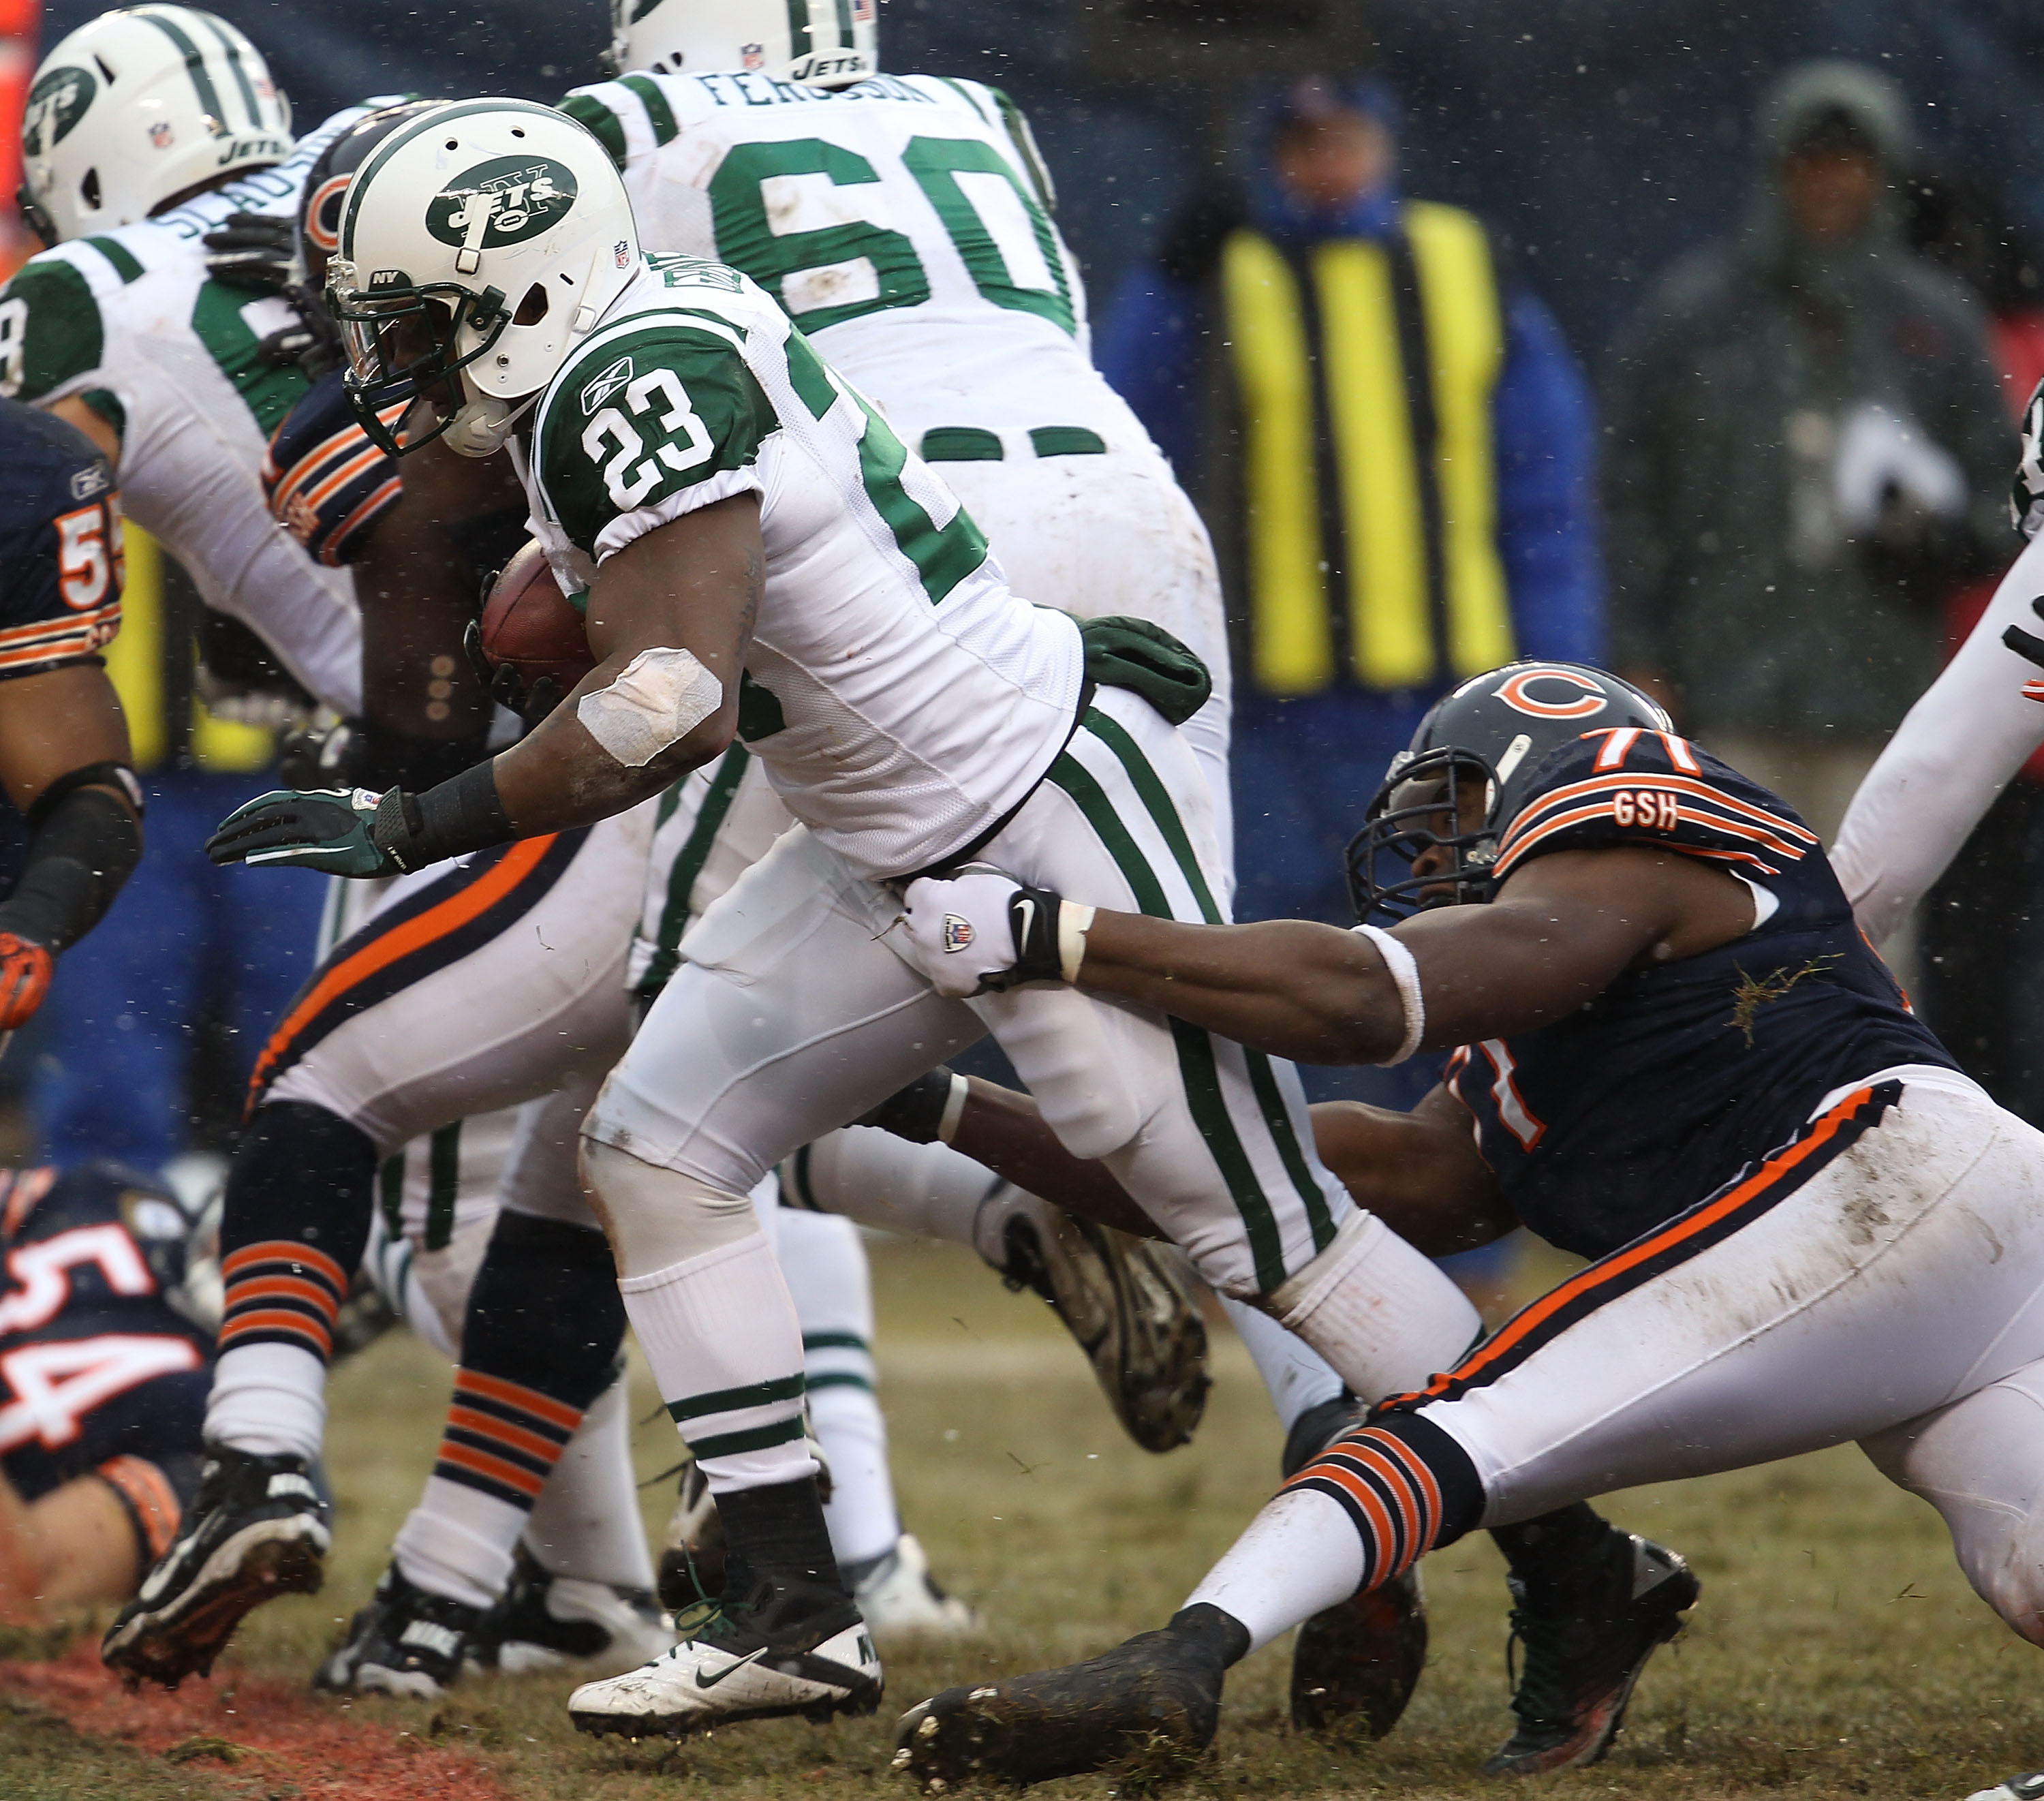 CHICAGO, IL - DECEMBER 26: Shonn Greene #23 of the New York Jets breaks away from Israel Idonije #71 of the Chicago Bears as he runs for a touchdown against the Chicago Bears at Soldier Field on December 26, 2010 in Chicago, Illinois. The Bears defeated t